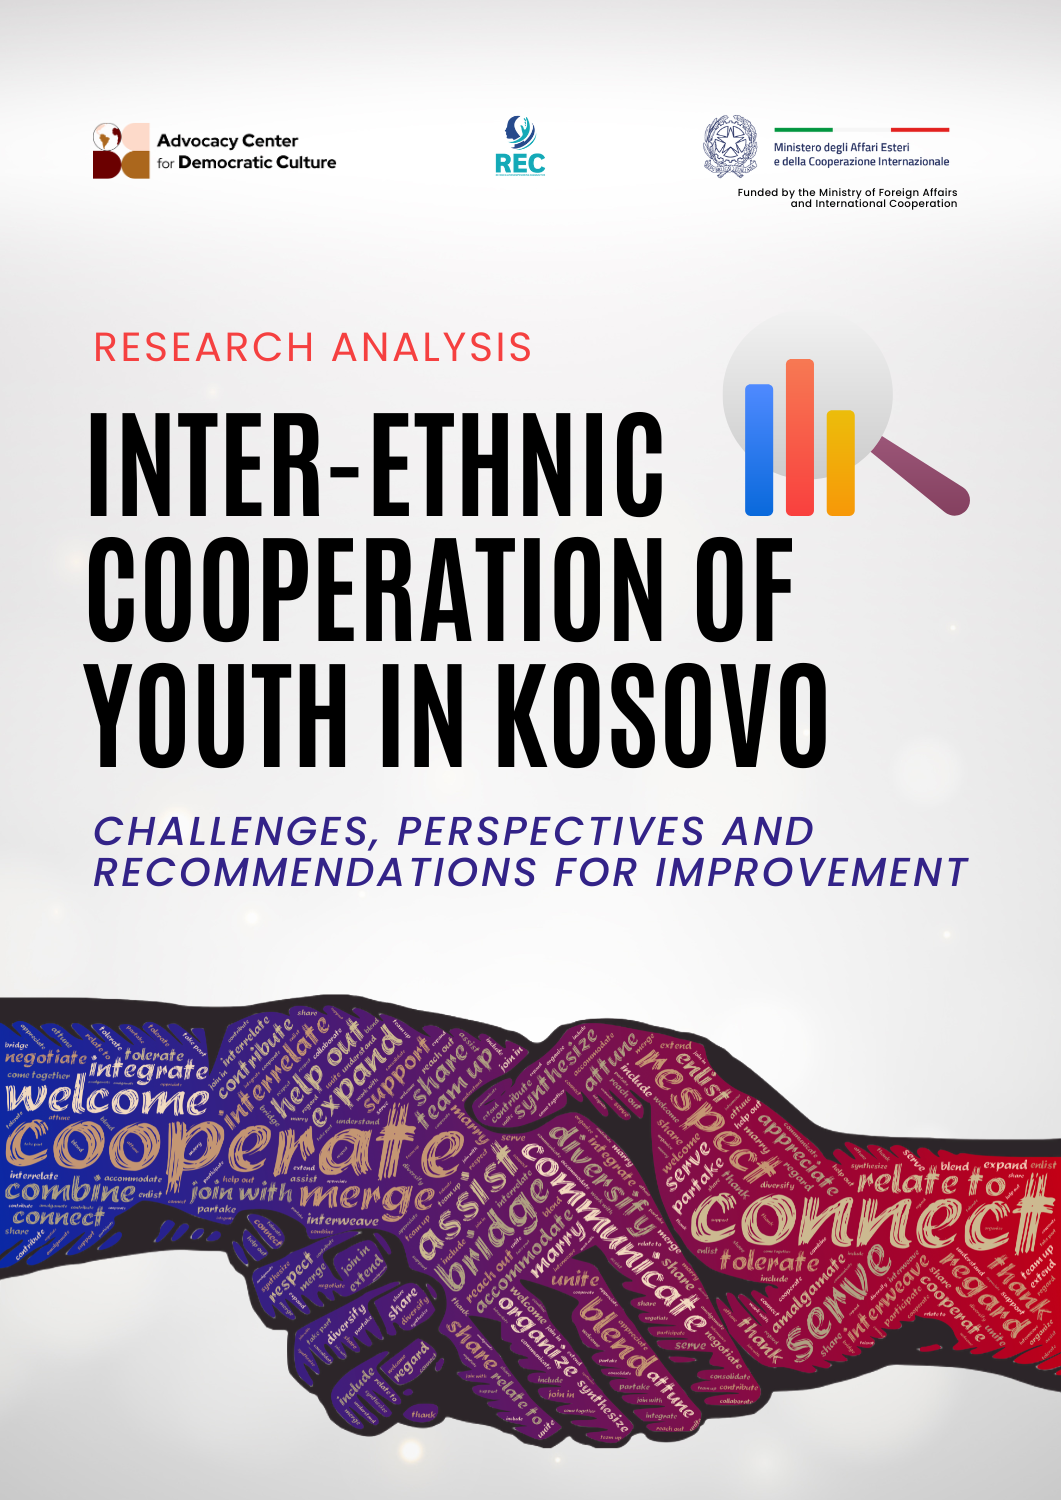 Inter-ethnic cooperation of youth in Kosovo